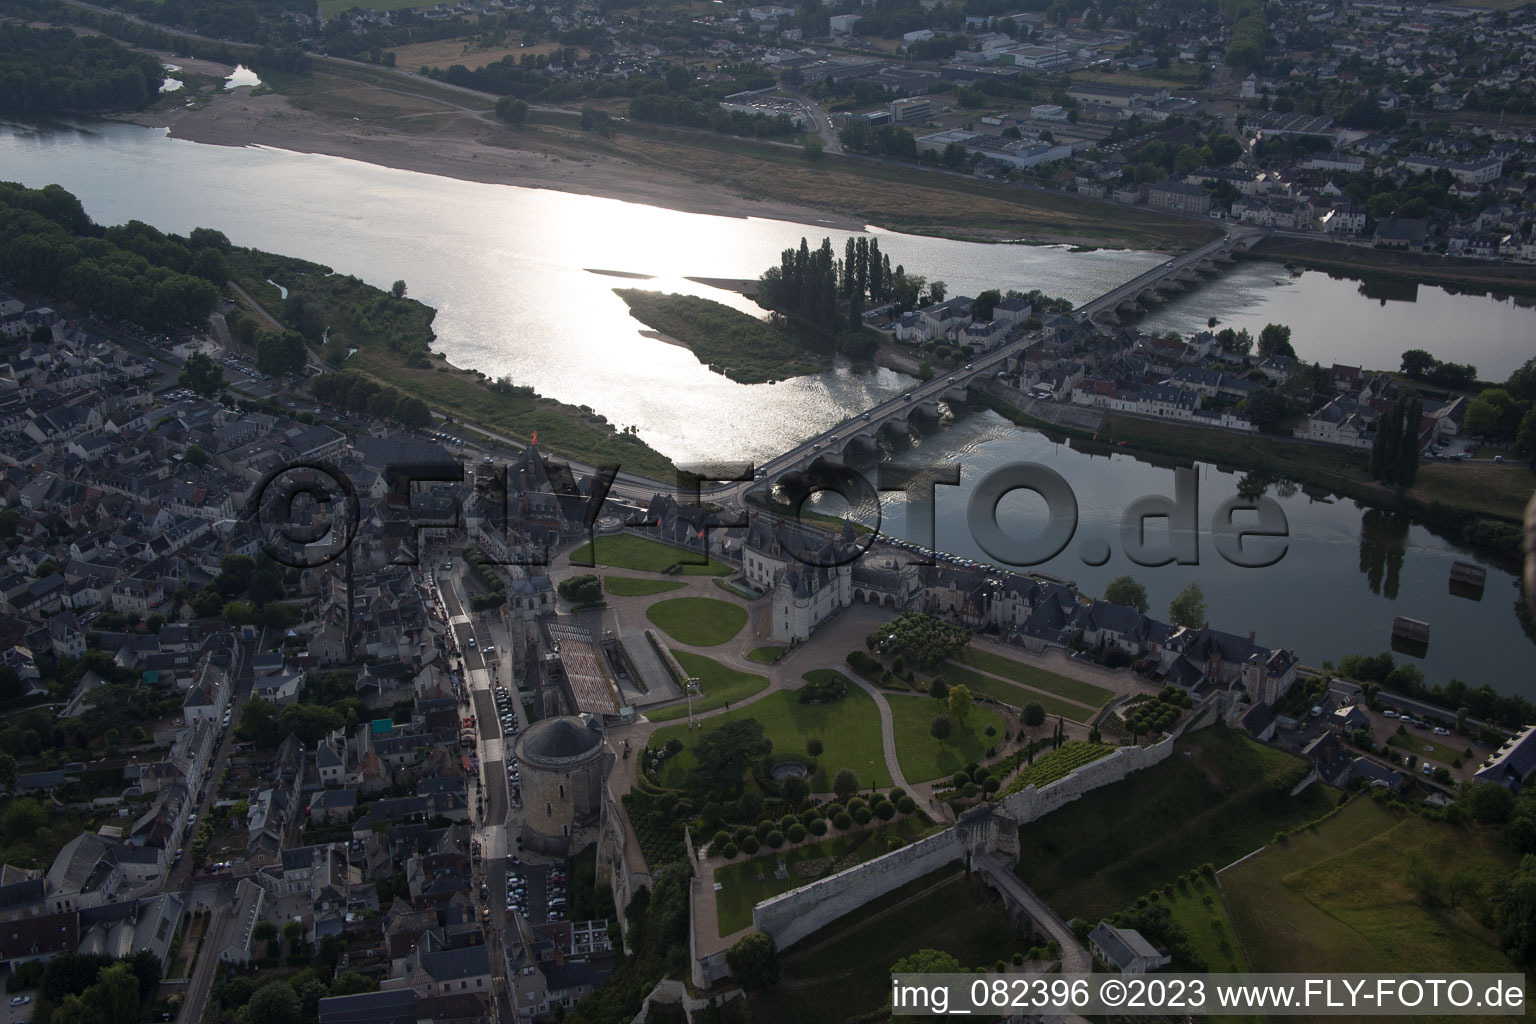 Amboise in the state Indre et Loire, France seen from a drone